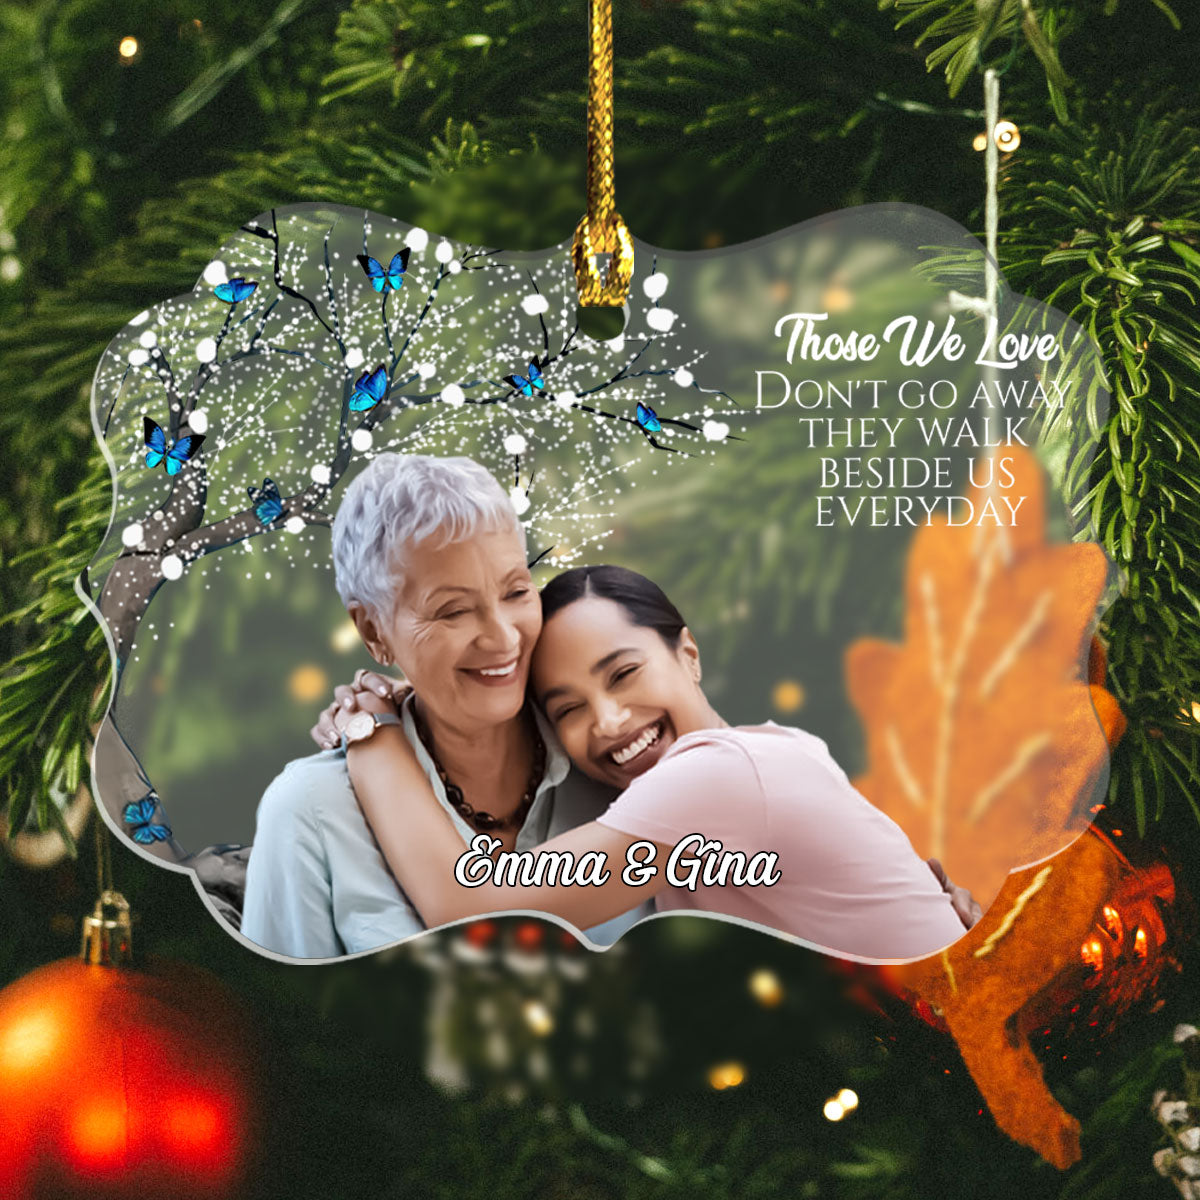 Those We Love Don't Go Away - Personalized Ornament - Memorial Gift For Family, Christmas Gift  Banner-fb_4a89efbe-abb0-4f35-a05e-9c6cda734a32.jpg?v=1693386310